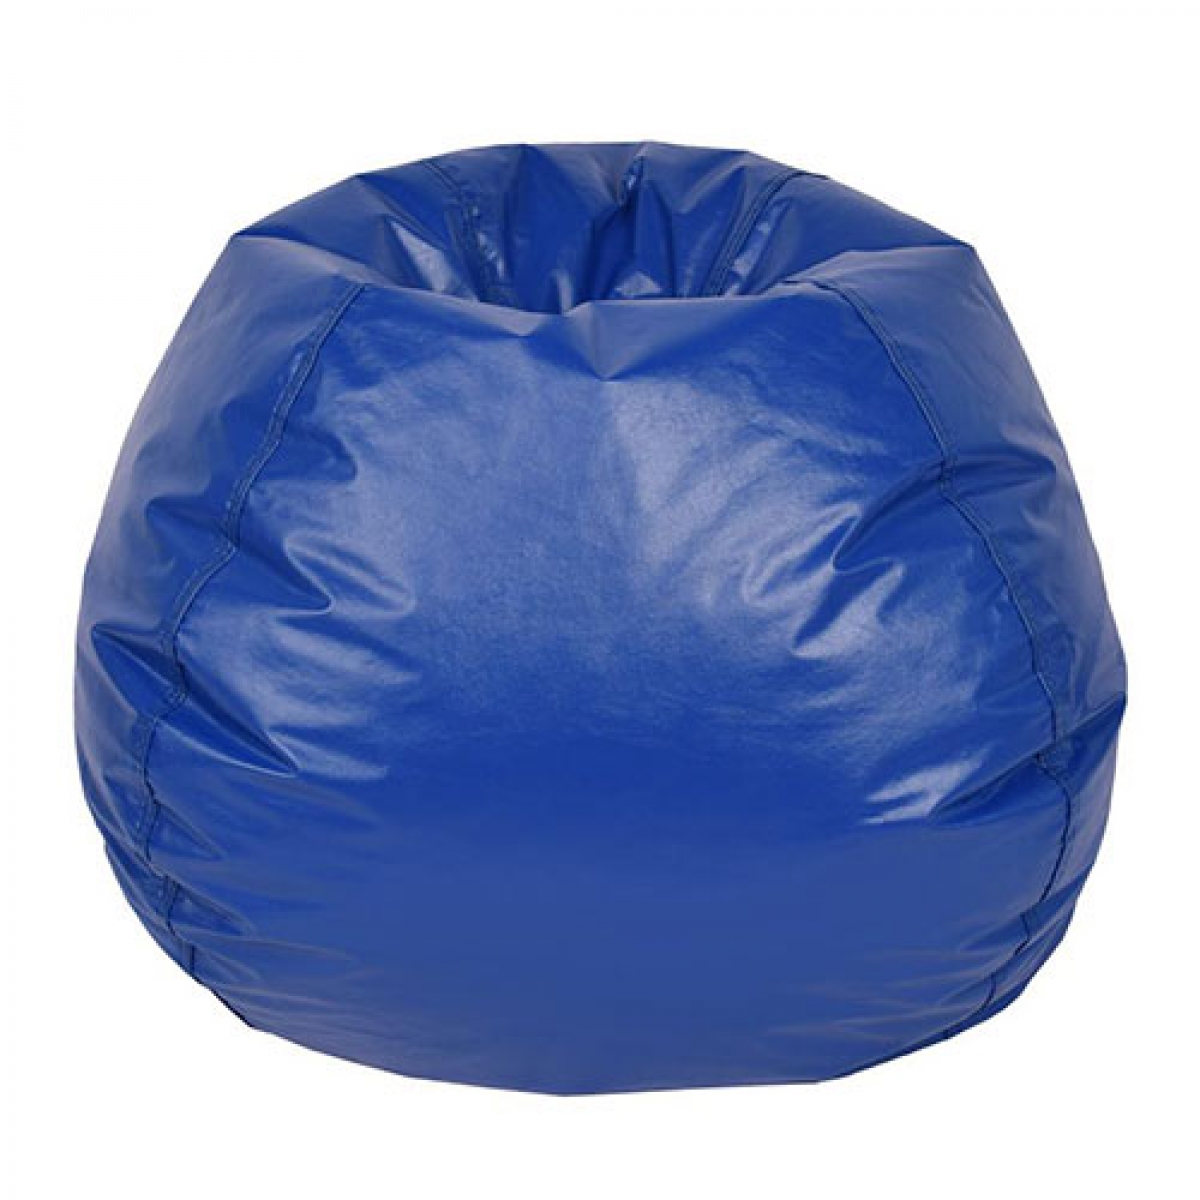 Bean bag chairs, exercise balls finding way into classrooms